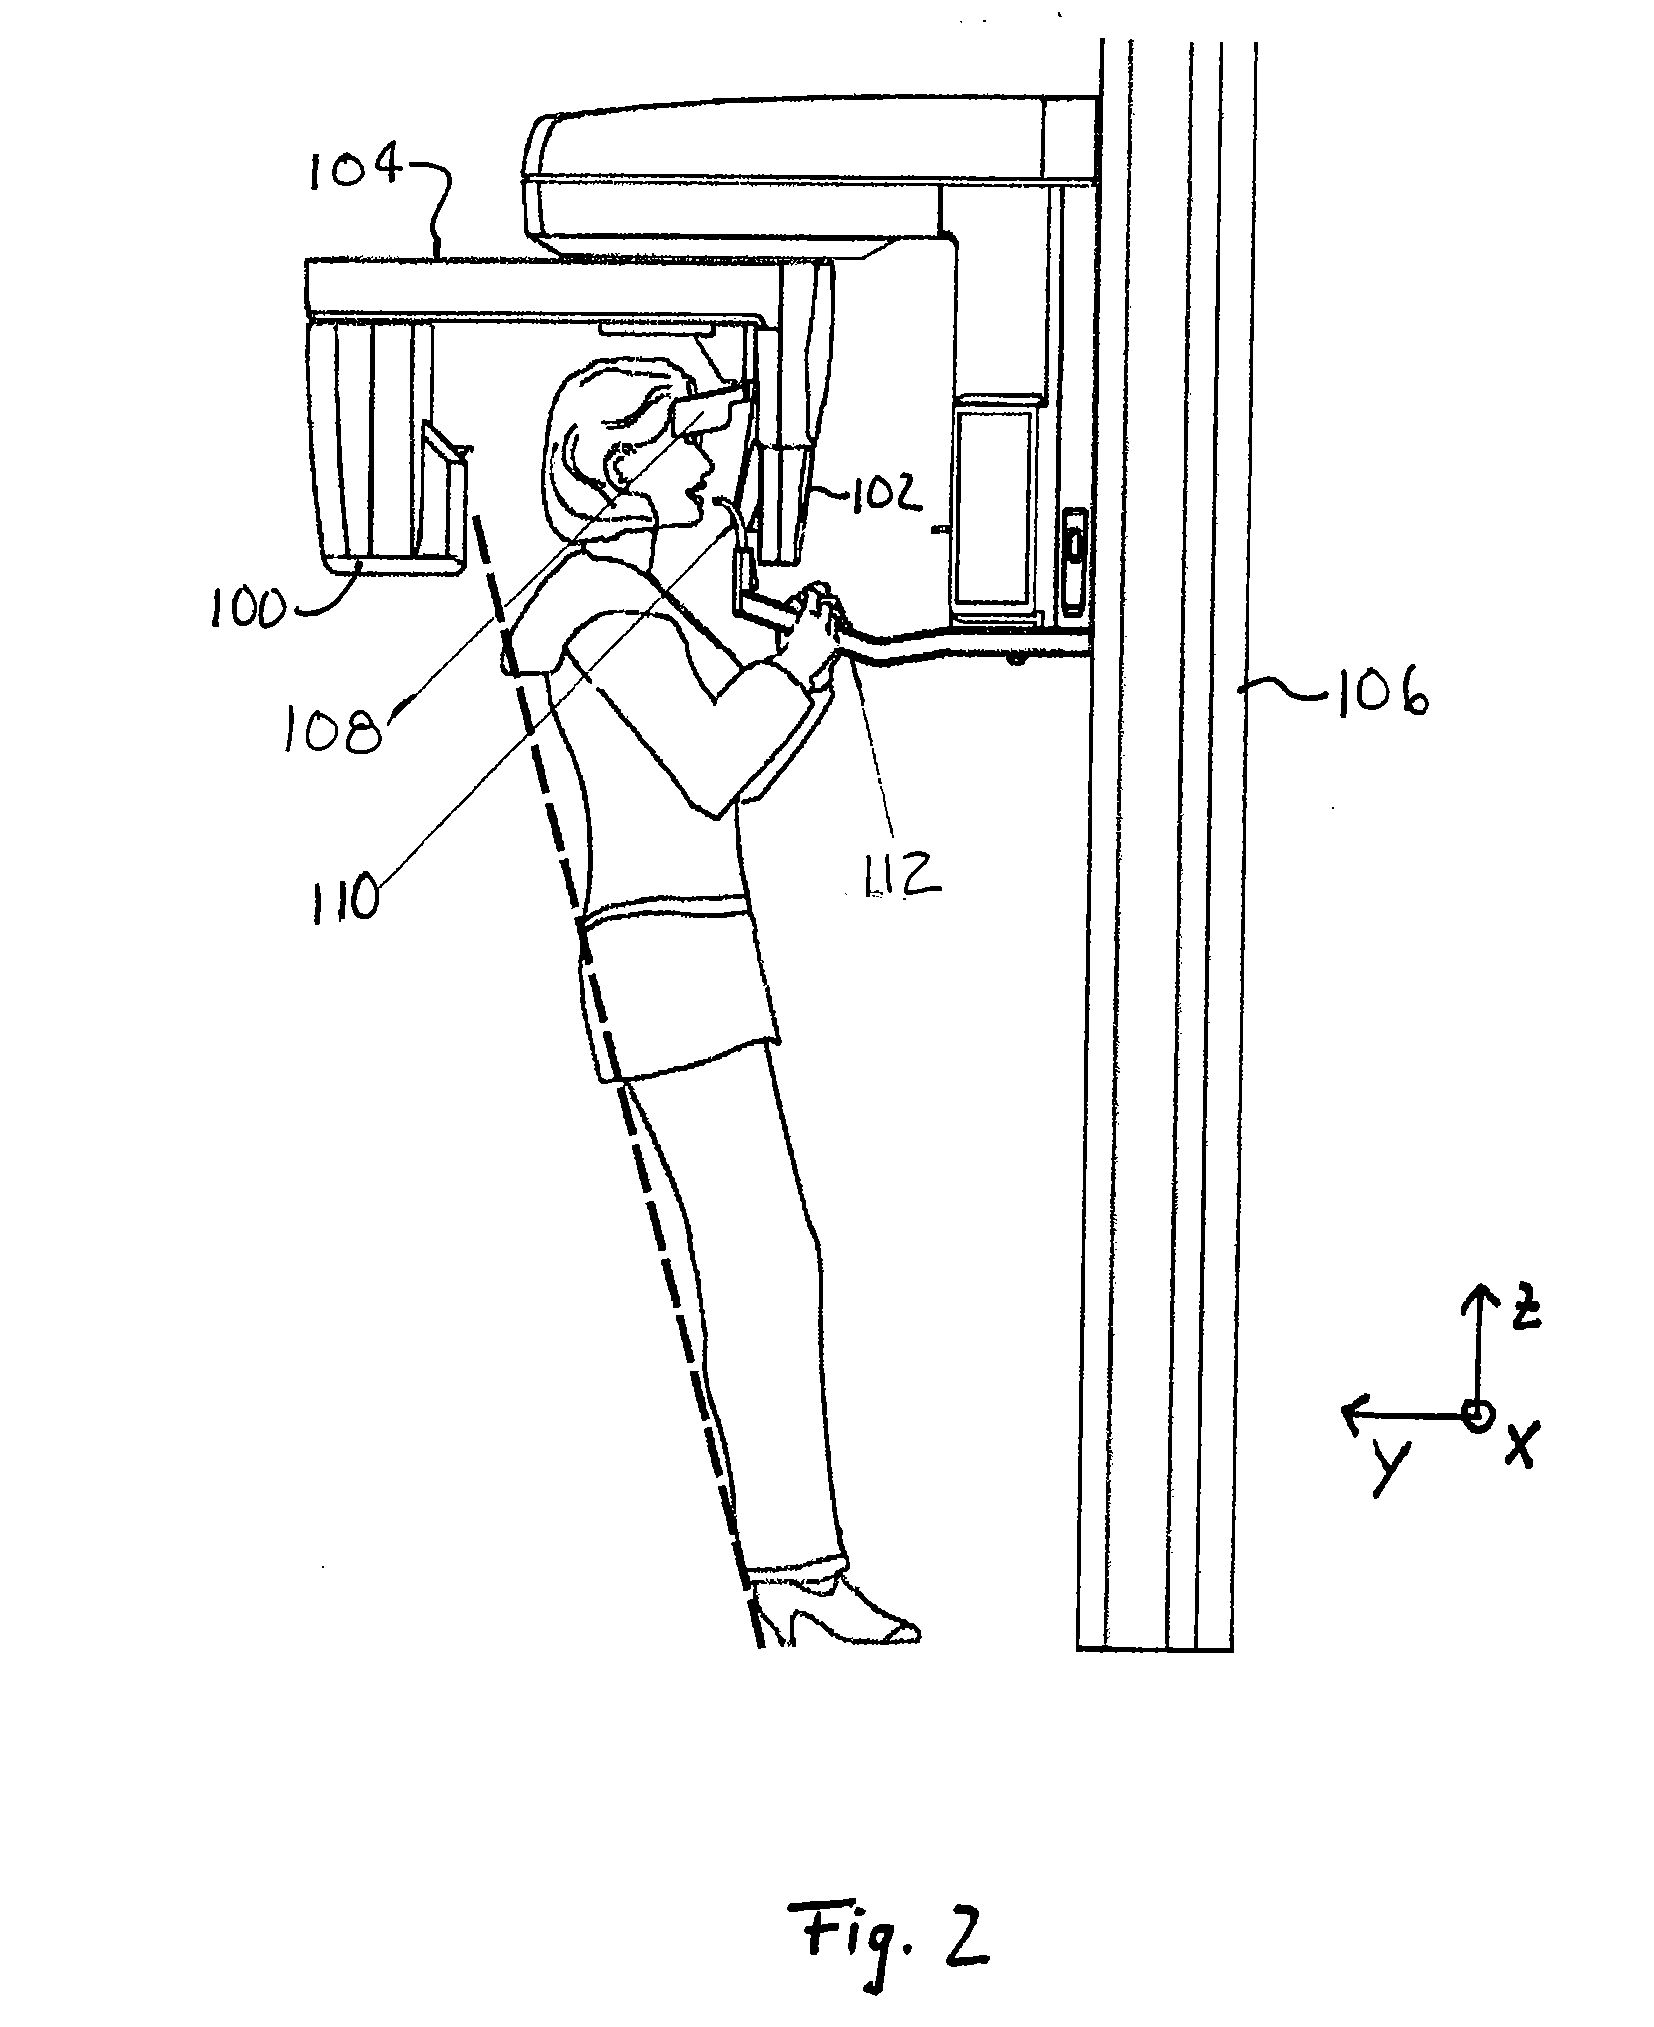 Dental x-ray apparatus and method of positioning a patient therein